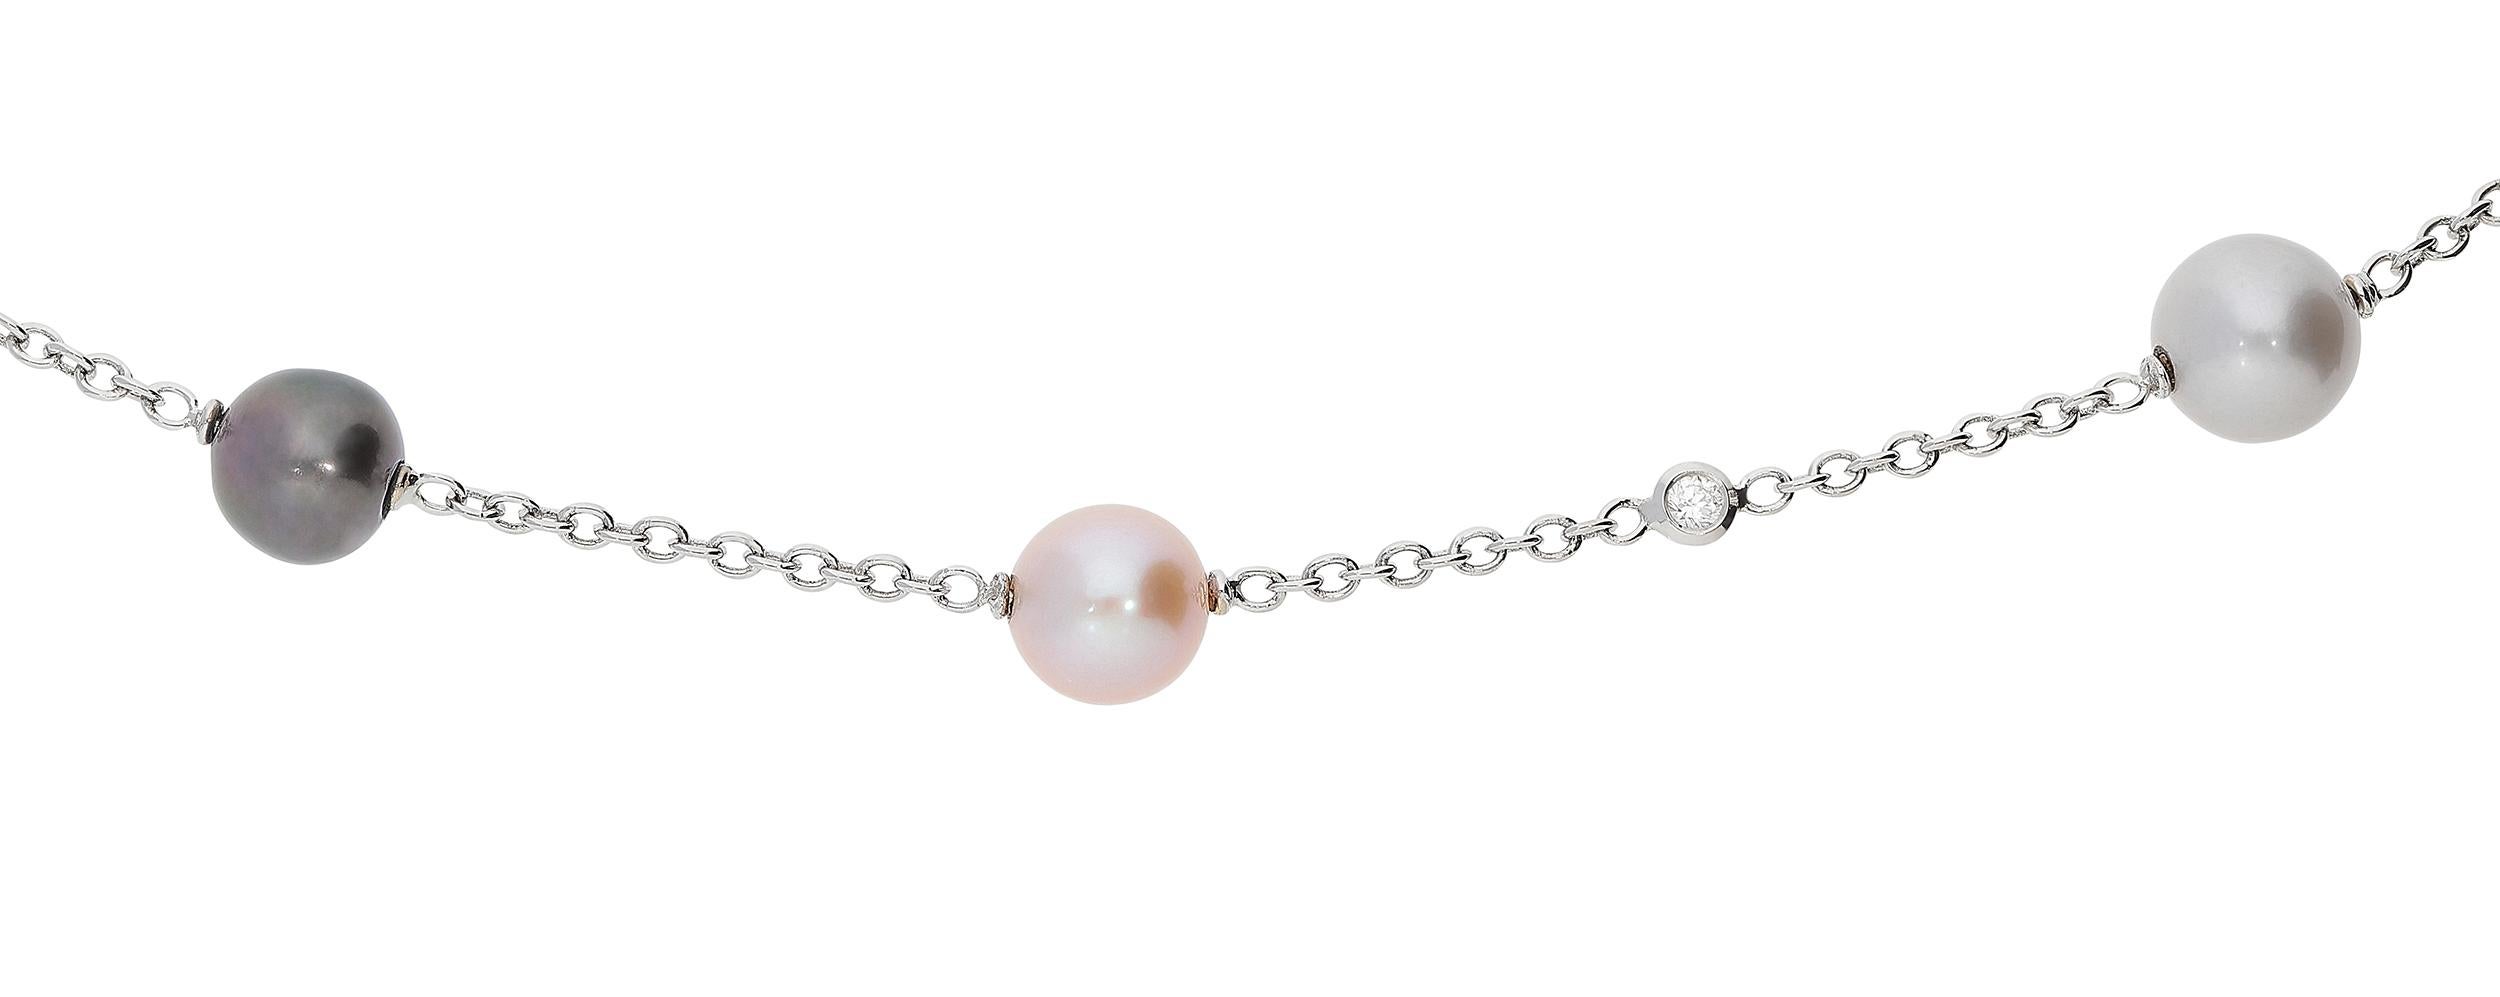 Round Cut 5.16 Carat White GSI Diamonds Pearls White Gold Pendant Long Chain Necklace For Sale